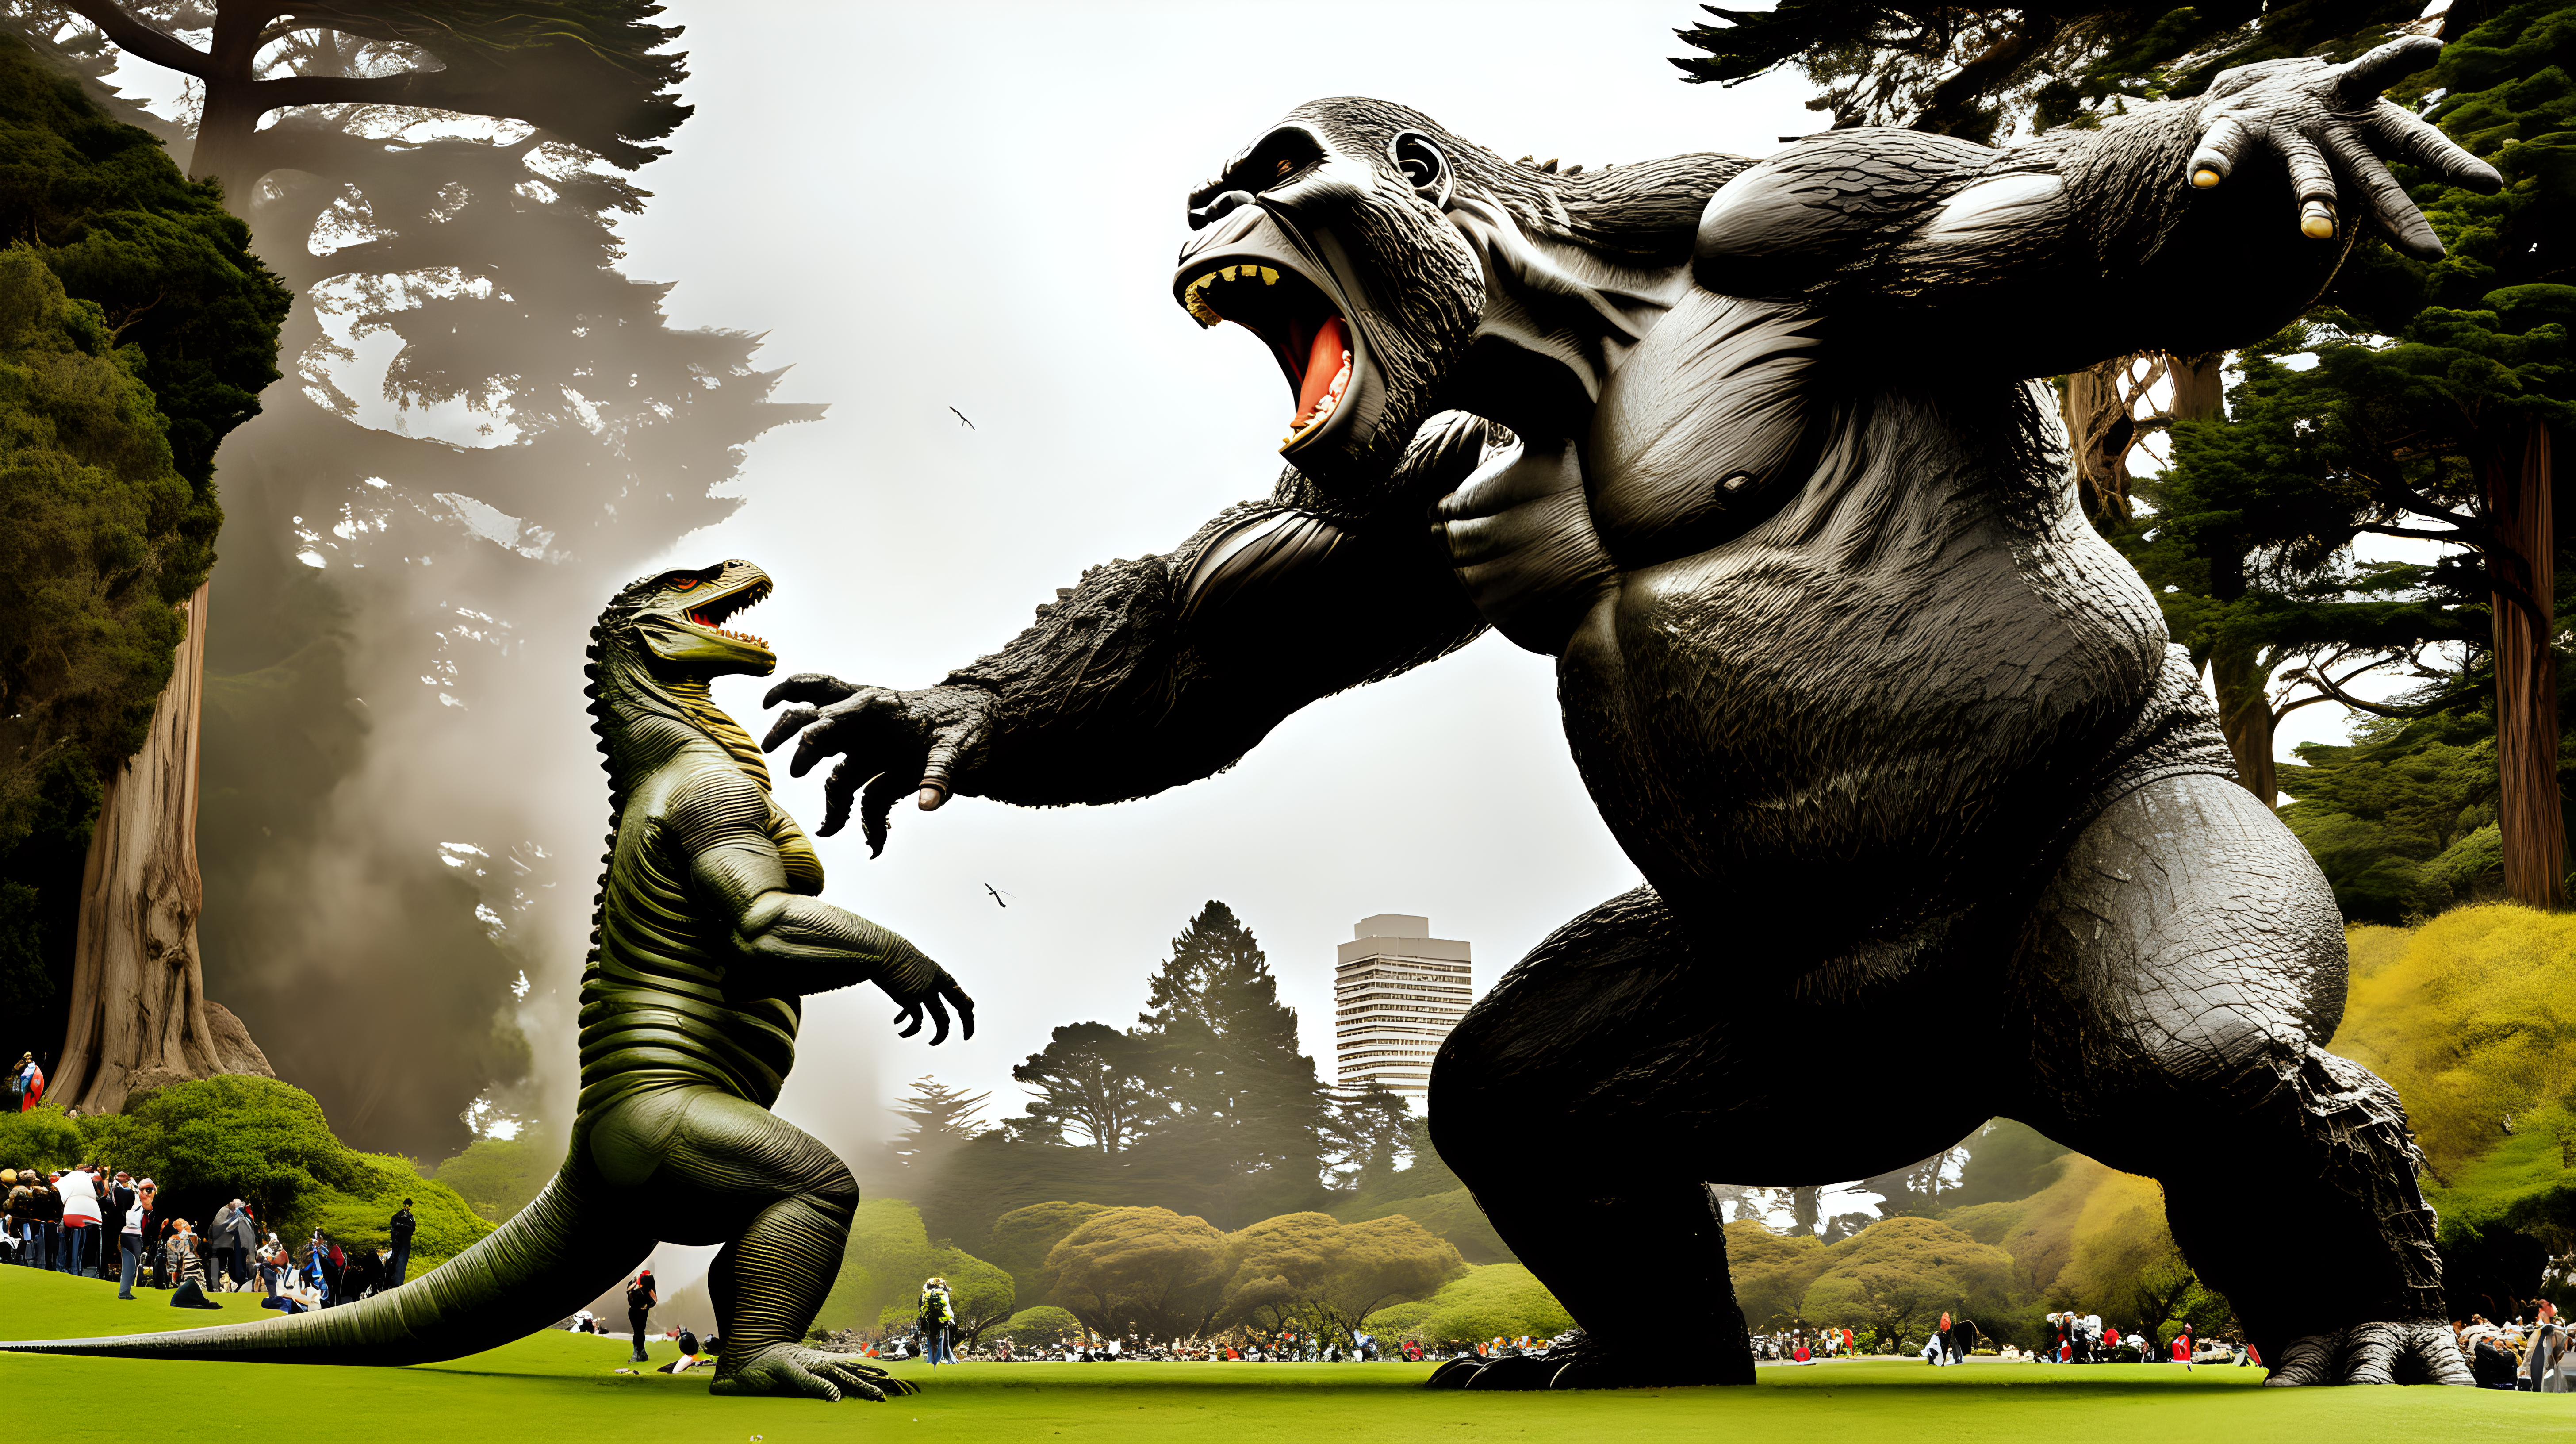 King Kong and Godzilla fighting a giant lizard in Golden Gate Park